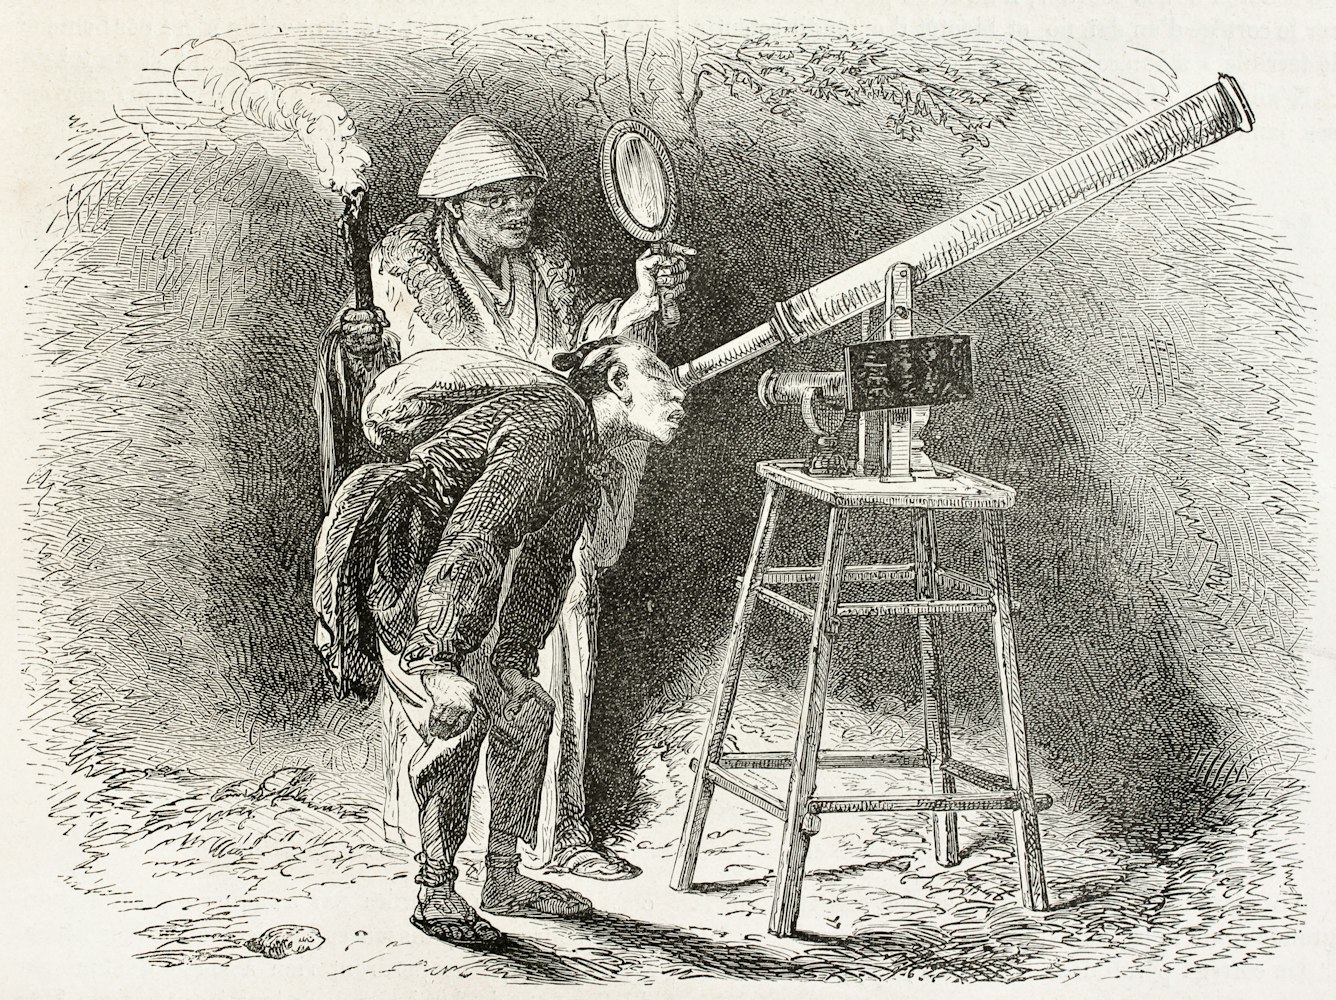 Japanese astronomer looking into telescope